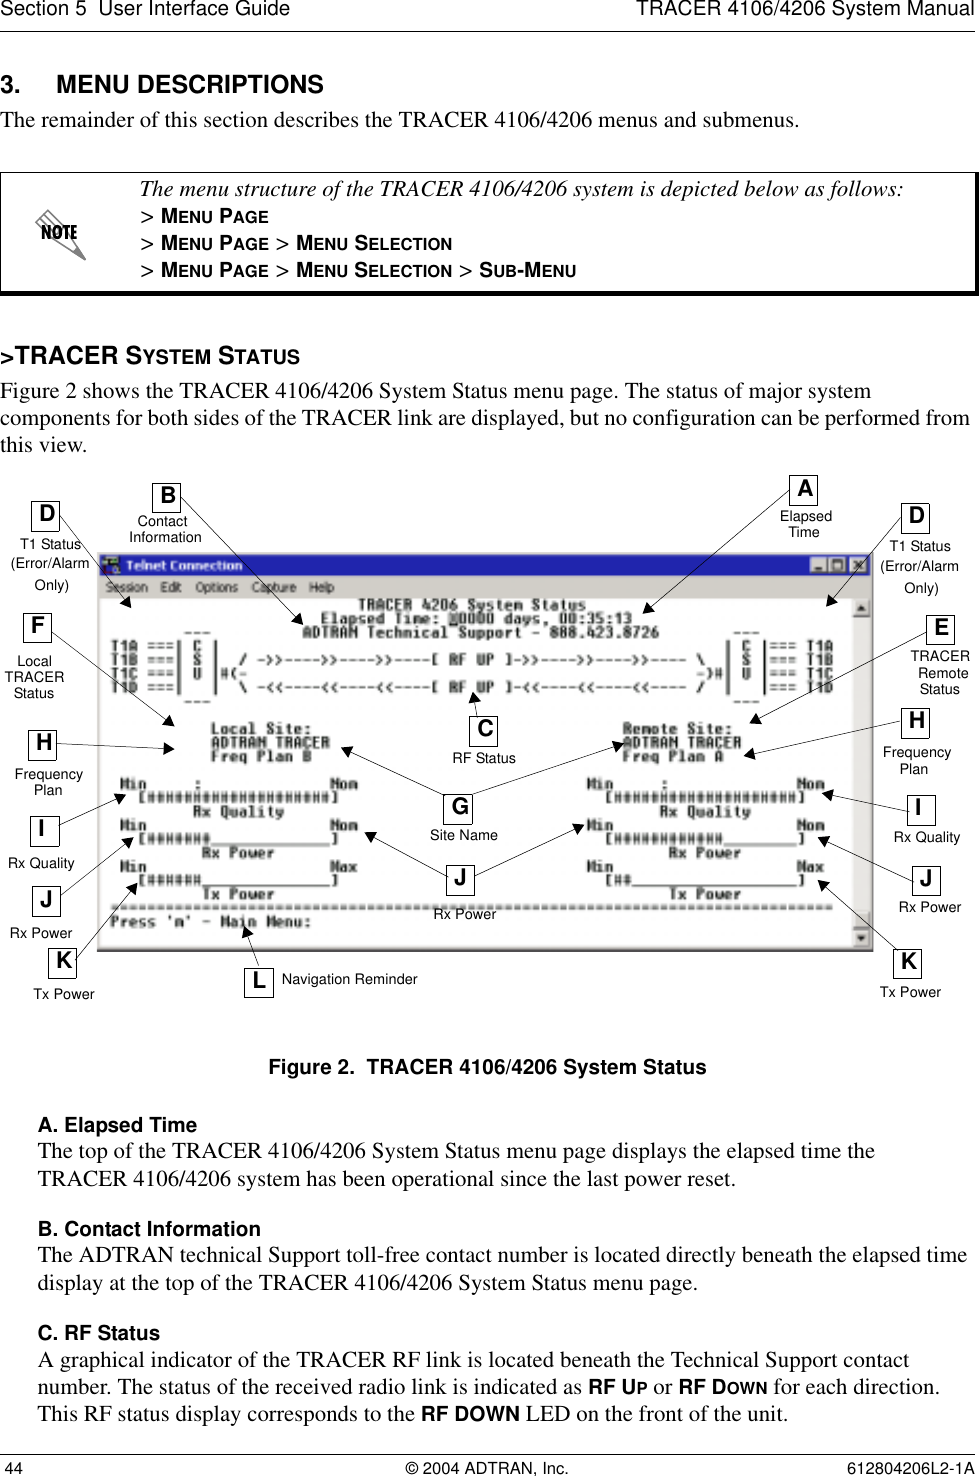 Section 5  User Interface Guide TRACER 4106/4206 System Manual 44 © 2004 ADTRAN, Inc. 612804206L2-1A3. MENU DESCRIPTIONSThe remainder of this section describes the TRACER 4106/4206 menus and submenus. &gt;TRACER SYSTEM STATUSFigure 2 shows the TRACER 4106/4206 System Status menu page. The status of major system components for both sides of the TRACER link are displayed, but no configuration can be performed from this view.Figure 2.  TRACER 4106/4206 System StatusA. Elapsed TimeThe top of the TRACER 4106/4206 System Status menu page displays the elapsed time theTRACER 4106/4206 system has been operational since the last power reset.B. Contact InformationThe ADTRAN technical Support toll-free contact number is located directly beneath the elapsed time display at the top of the TRACER 4106/4206 System Status menu page.C. RF StatusA graphical indicator of the TRACER RF link is located beneath the Technical Support contact number. The status of the received radio link is indicated as RF UP or RF DOWN for each direction. This RF status display corresponds to the RF DOWN LED on the front of the unit.The menu structure of the TRACER 4106/4206 system is depicted below as follows:&gt; MENU PAGE&gt; MENU PAGE &gt; MENU SELECTION&gt; MENU PAGE &gt; MENU SELECTION &gt; SUB-MENUAElapsedTimeBContactInformationFLocalHFrequencyIRx PowerCRF StatusGDT1 StatusERemoteHIRx QualityKTx PowerJTx PowerKNavigation Reminder(Error/AlarmOnly)TRACERStatusPlanFrequencyPlanTRACERStatusSite NameDT1 Status(Error/AlarmOnly)LRx Quality JRx PowerJRx Power